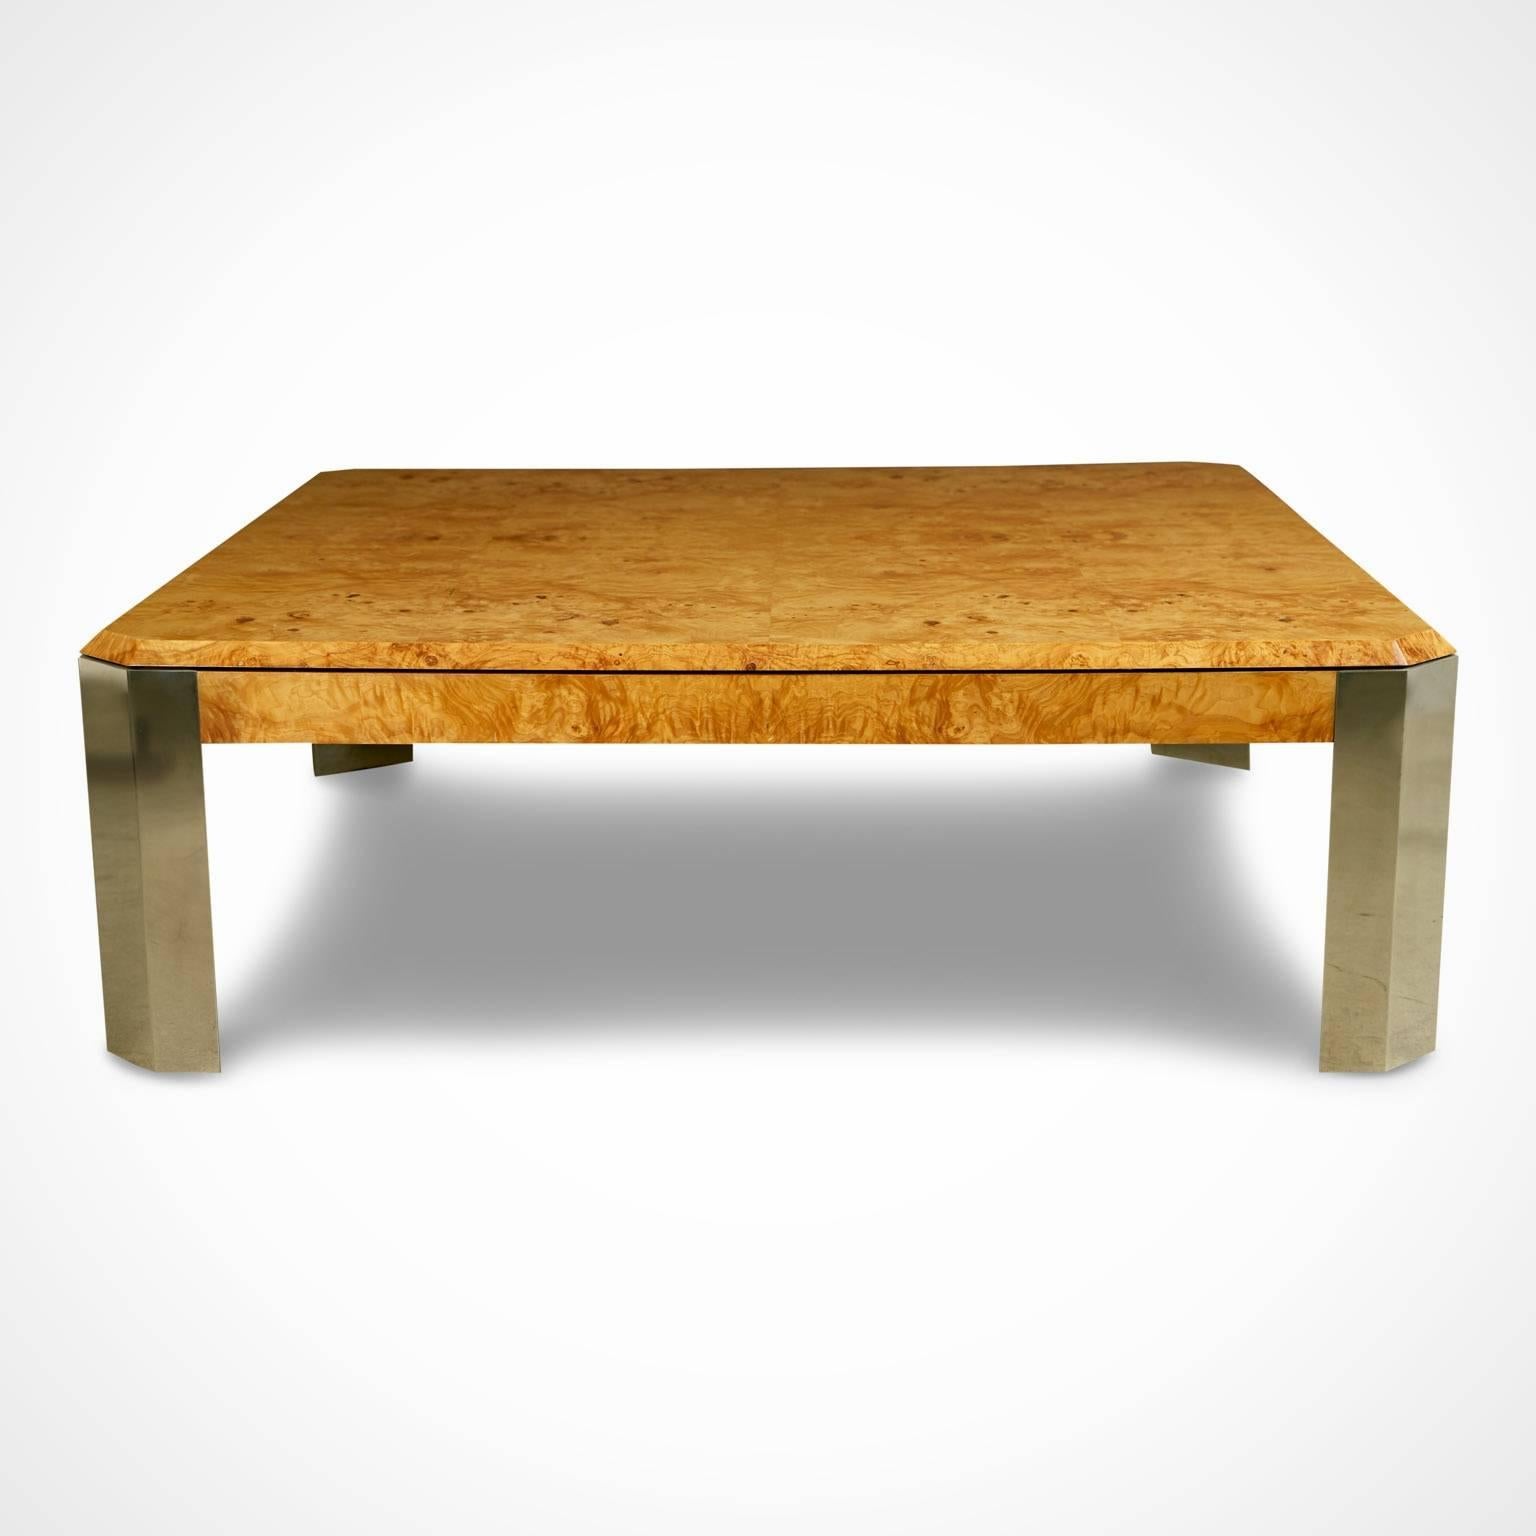 Expansive coffee table by Leon Rosen for The Pace collection. This vastly proportioned cocktail table is fabricated from exquisite lacquered burl wood which displays a mesmerizing grain and a stunning contrast of colors. The table is supported by